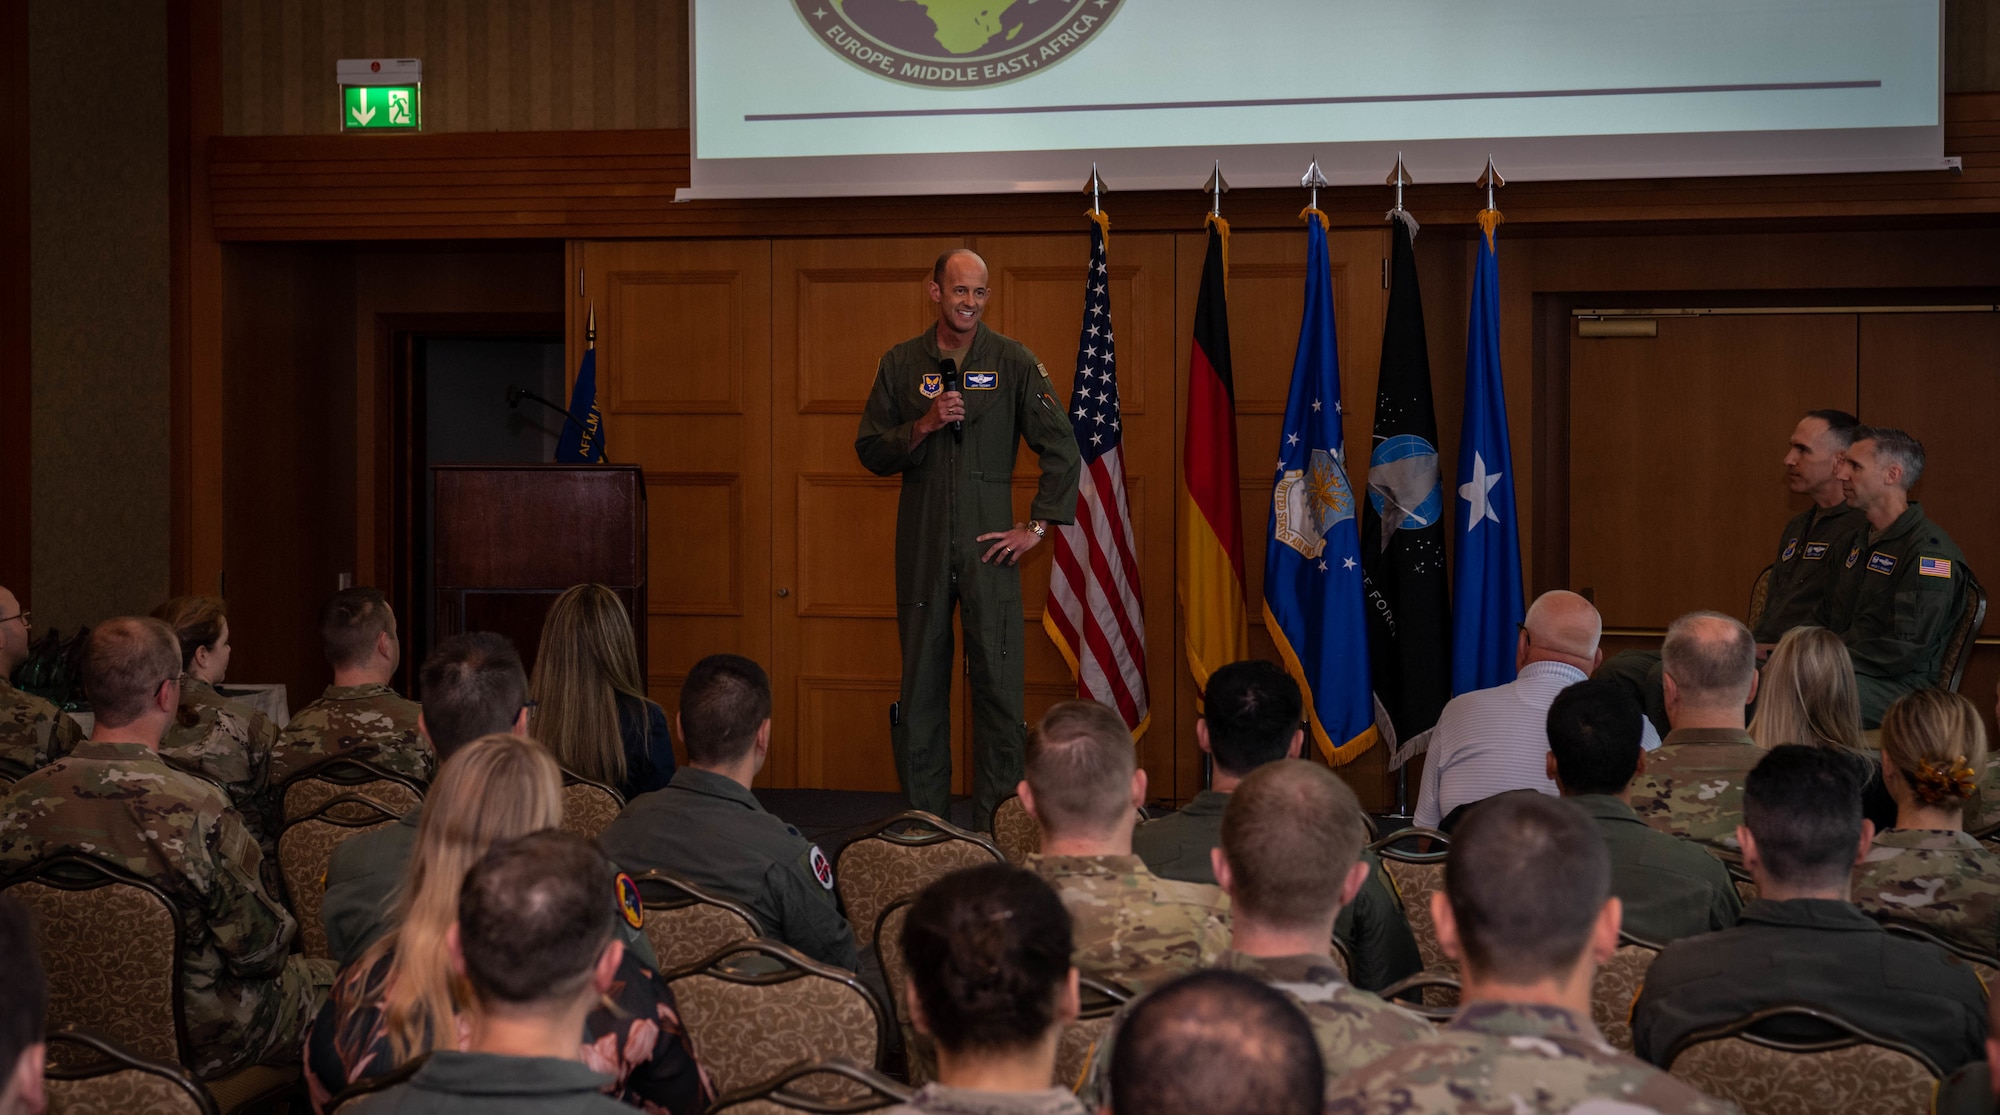 U.S. Air Force Brig. Gen. John Teichert, assistant deputy under Secretary of the Air Force, International Affairs, gives a speech during a Military Personnel Exchange Program change of command ceremony.